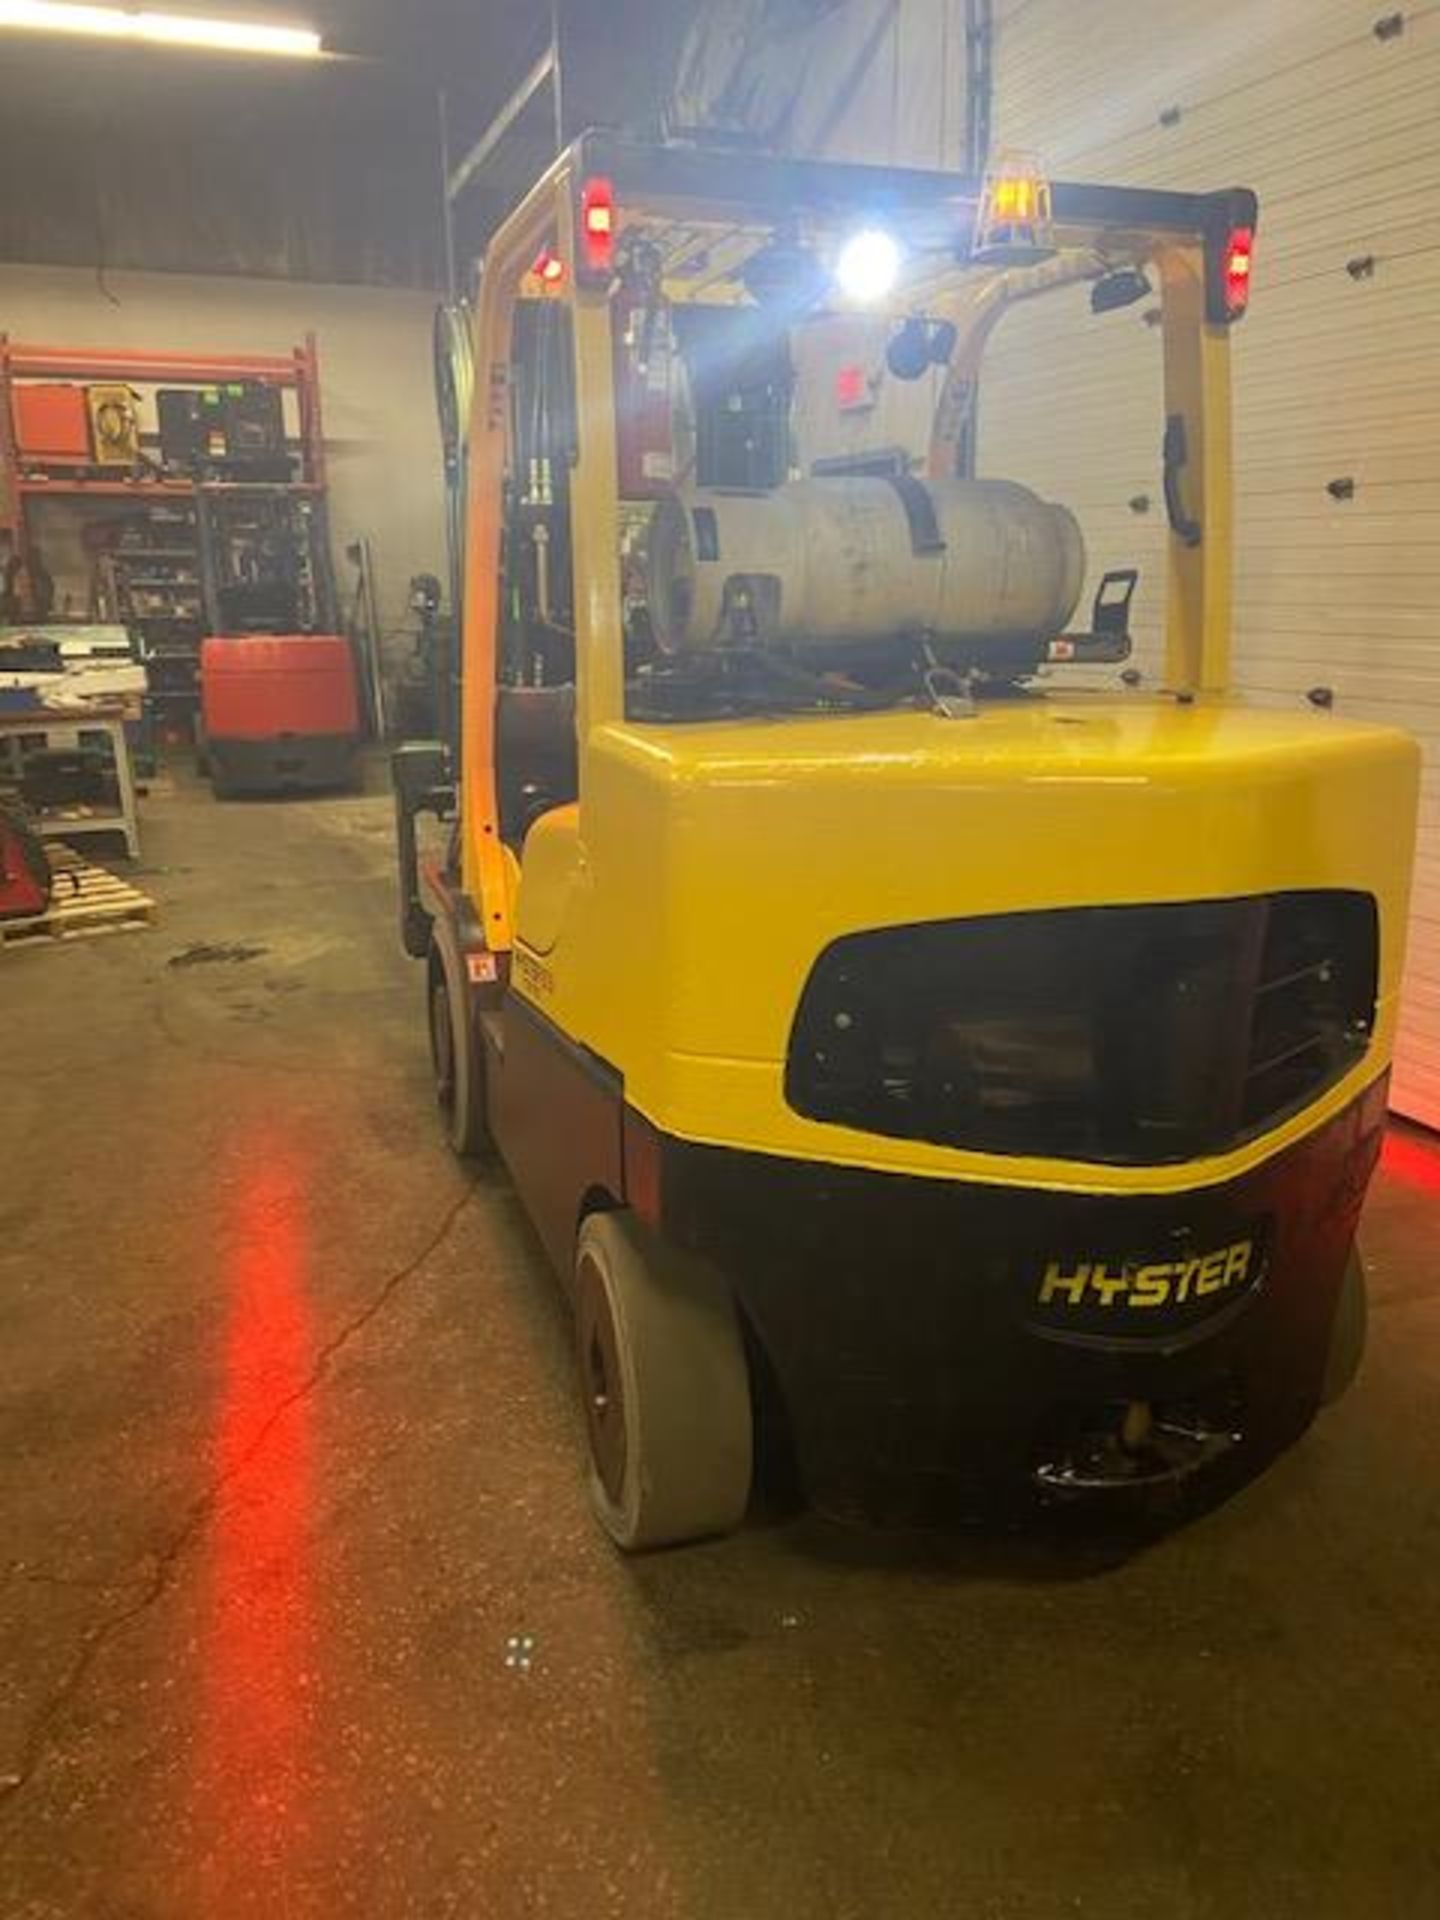 FREE CUSTOMS - MINT 2016 Hyster 15,500lbs Capacity Forklift S155FT LPG (propane) with sideshift w FP - Image 3 of 4